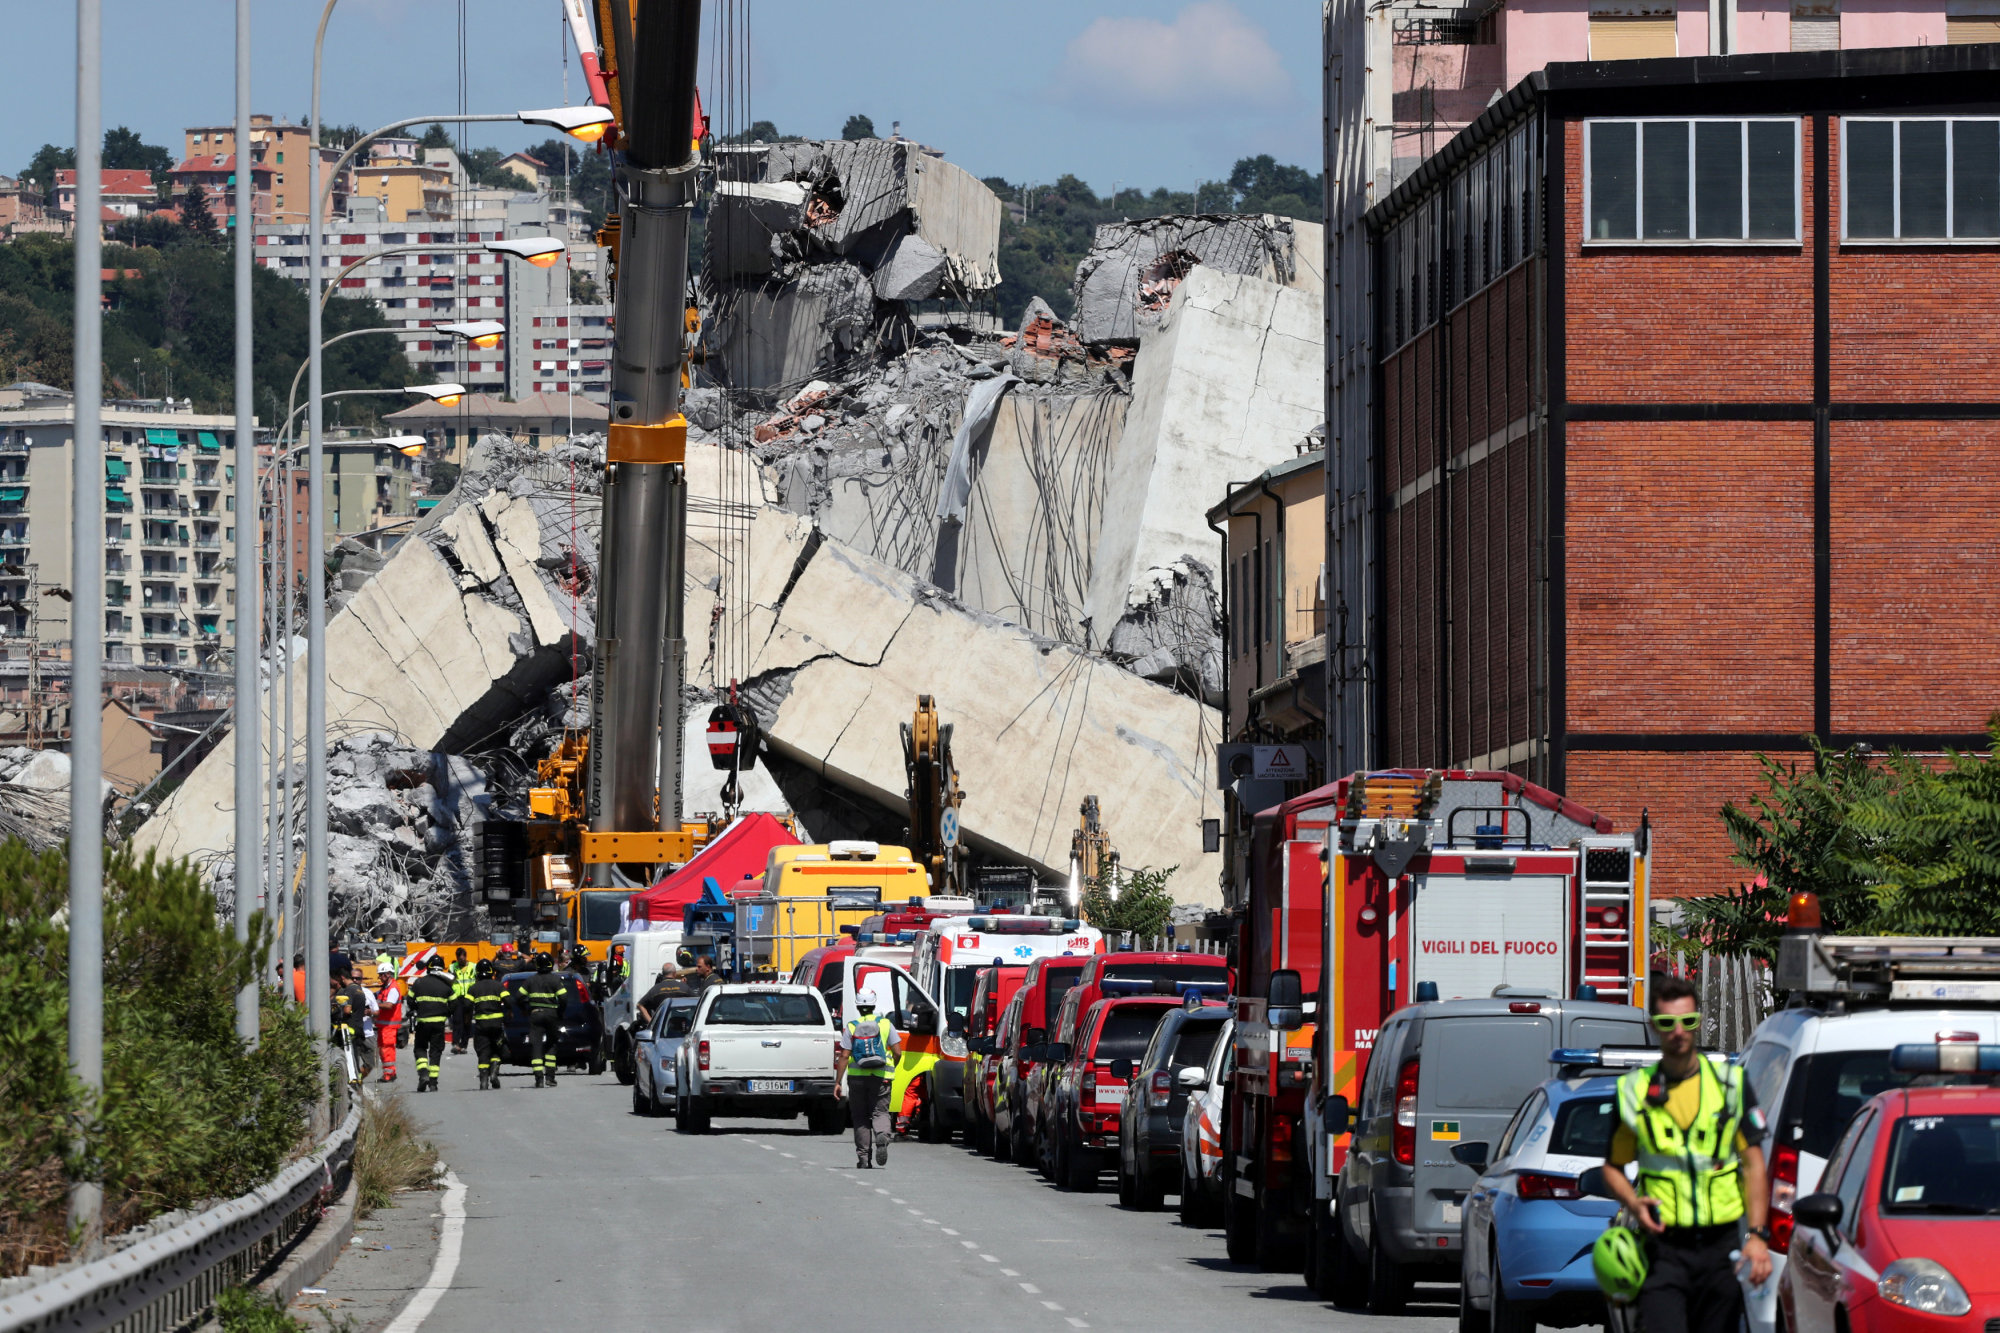 Bridge collapse costs Genoa companies €422 million in damages: Chamber of  Commerce | The Japan Times